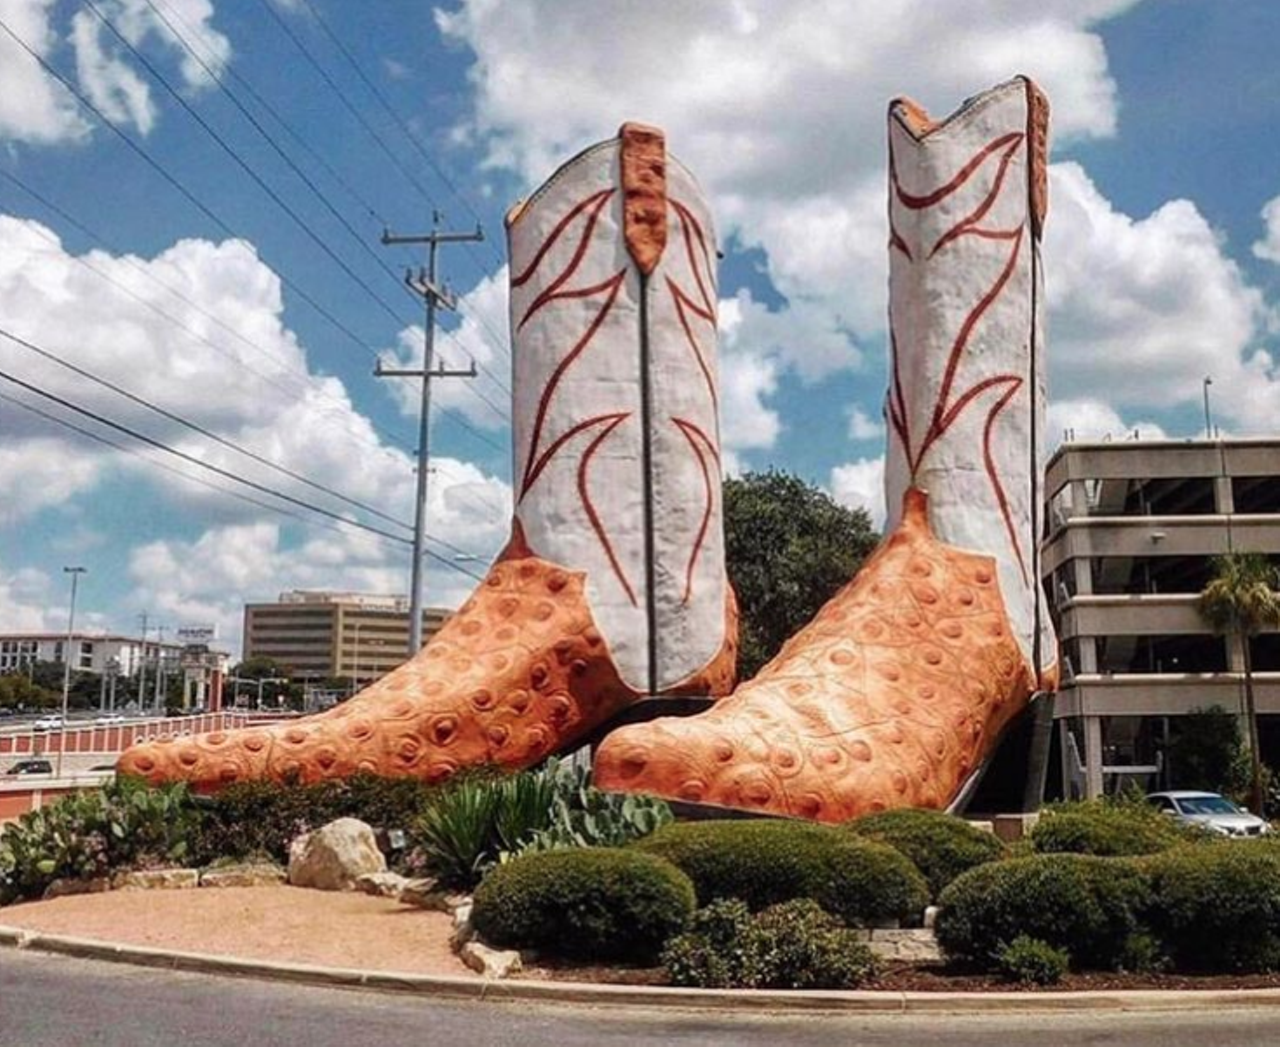 World’s largest cowboy boots
7400 San Pedro Ave
Native San Antonians might not pay any attention to the big-ass cowboys in front of North Star Mall, but think about it. It’s a pair of cowboy boots as tall as a building. Make them the world’s largest pair of cowboy boots – Guinness Book approved y todo! Strange? Yes. Puro San Antonio? Also yes.
Photo via Instagram / hurrem30_06